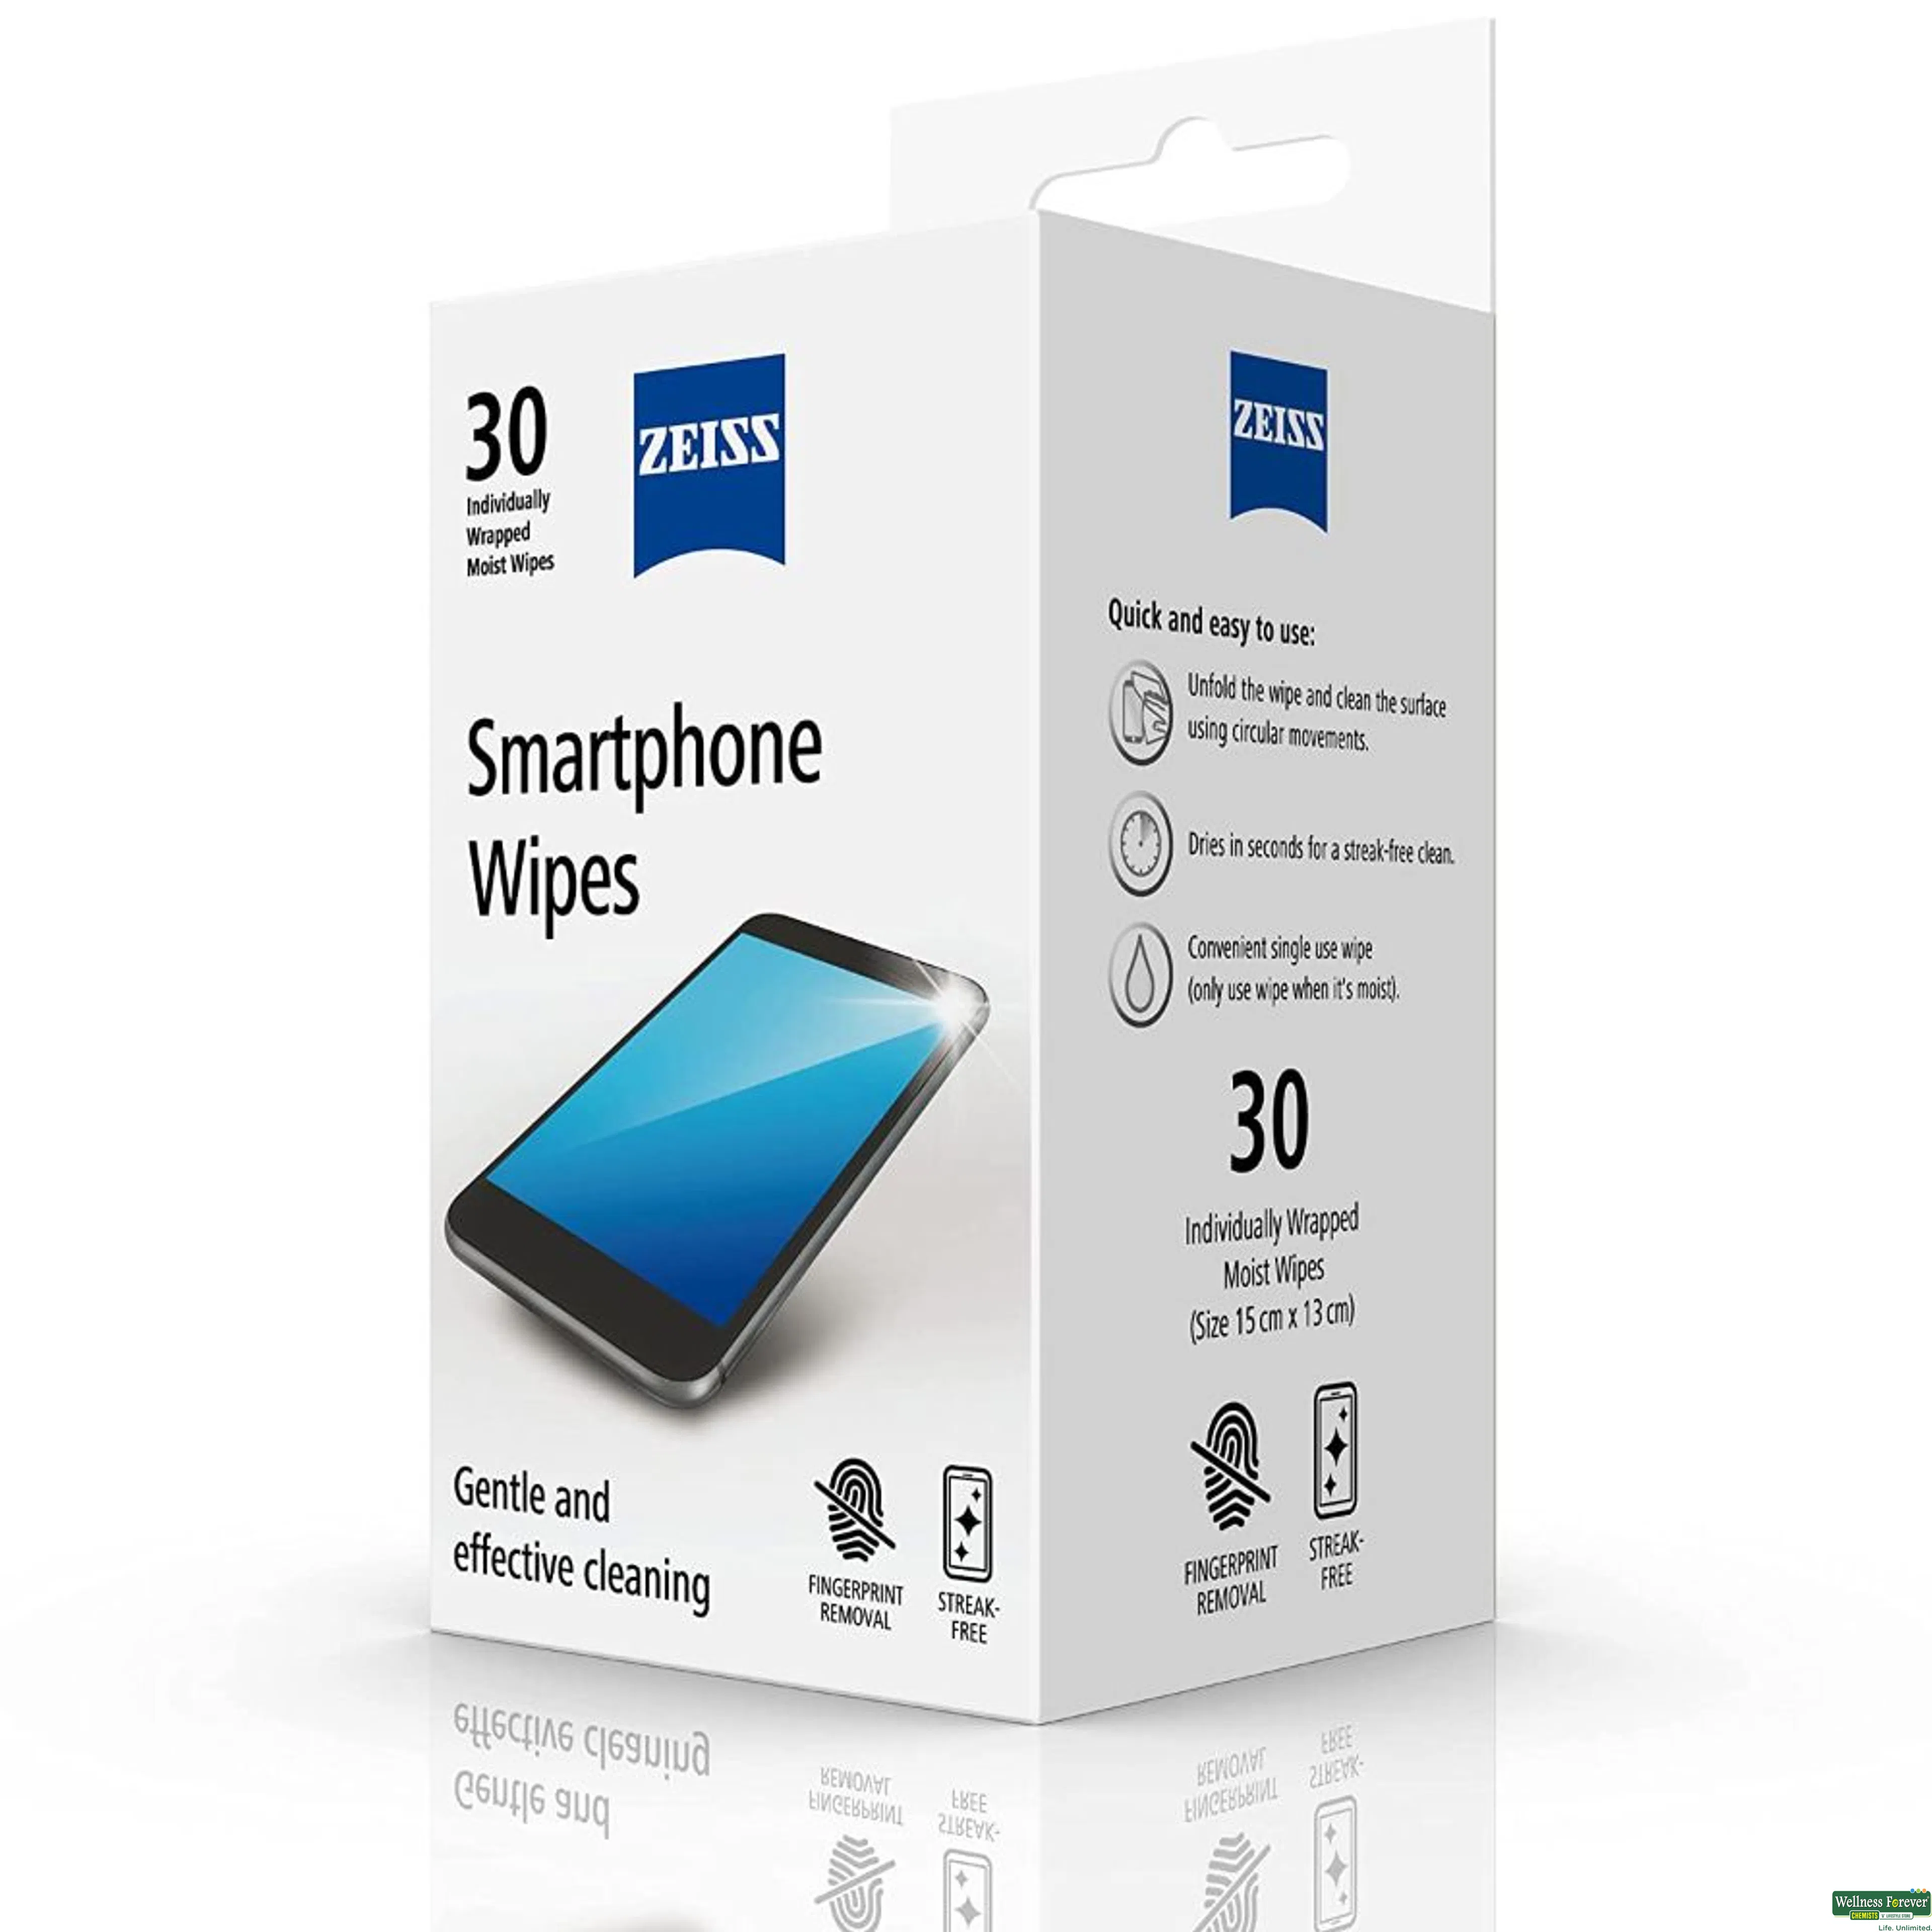 ZEISS WIPES SMART PHONE 30PC-image